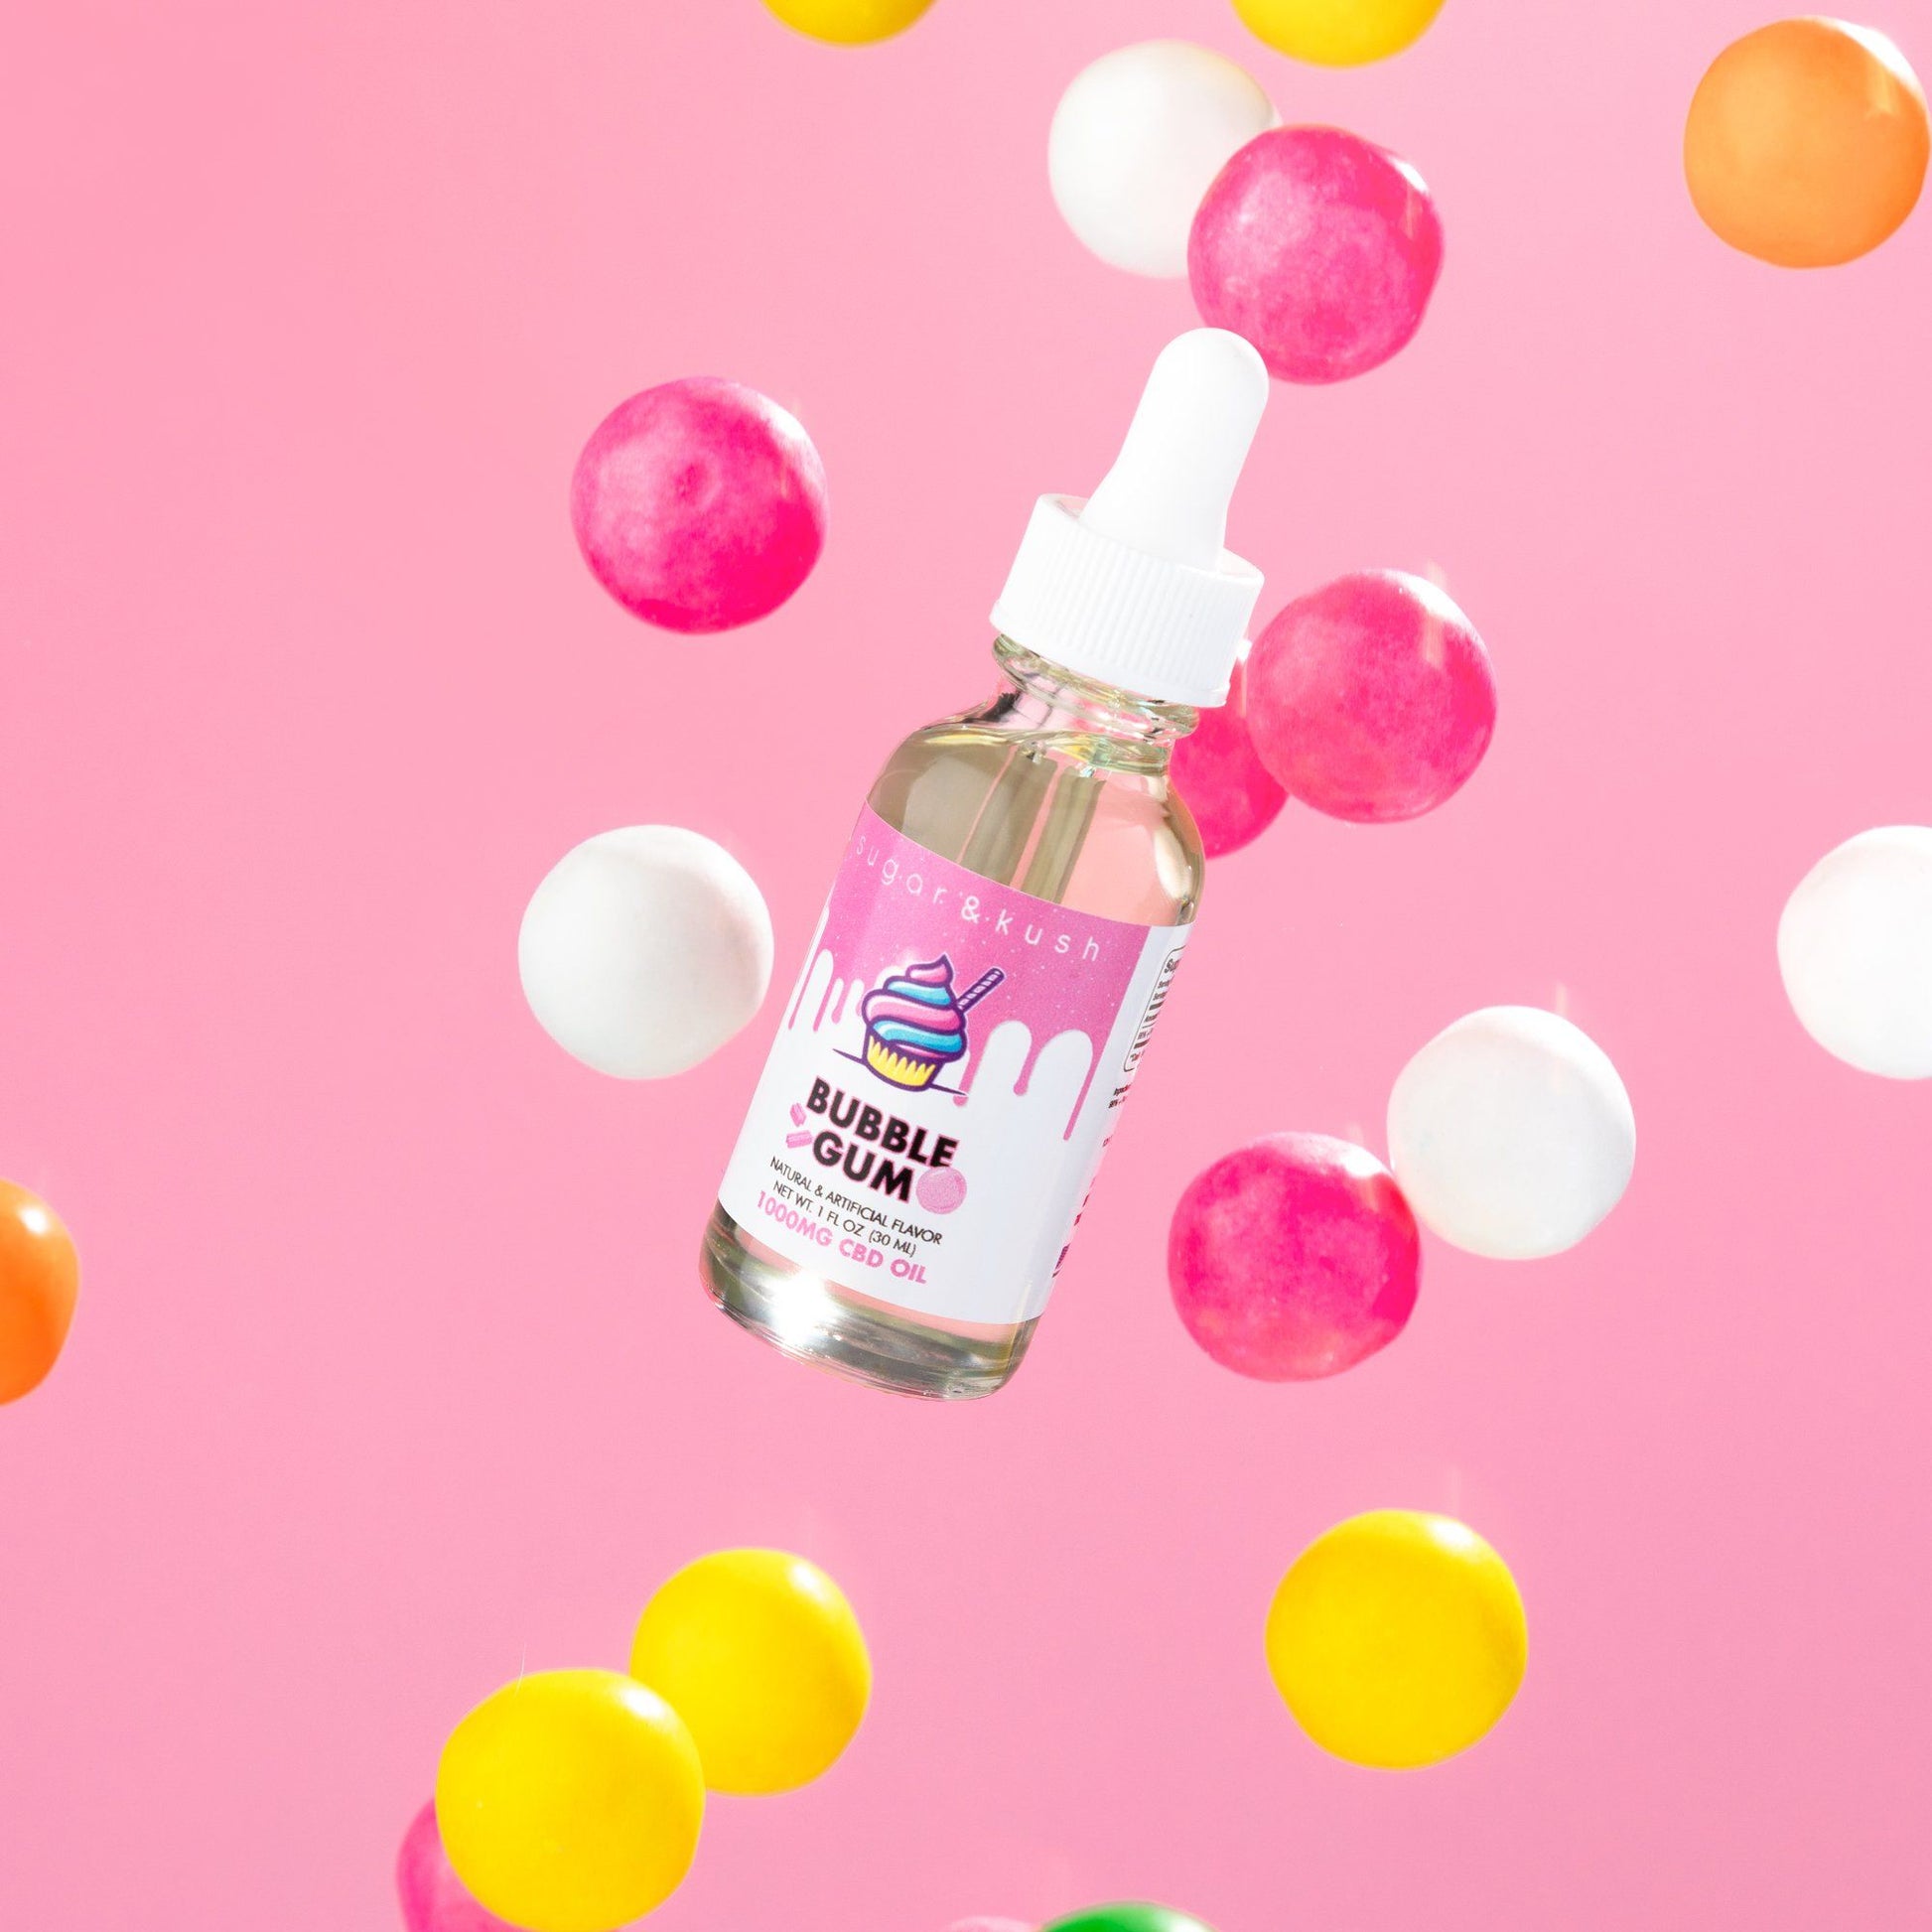 Save On the best CBDOil and CBD Oil from Sugar & Kush cbd. Save on our bubble gum cannabis oil with Sugar & Kush coupon codes.